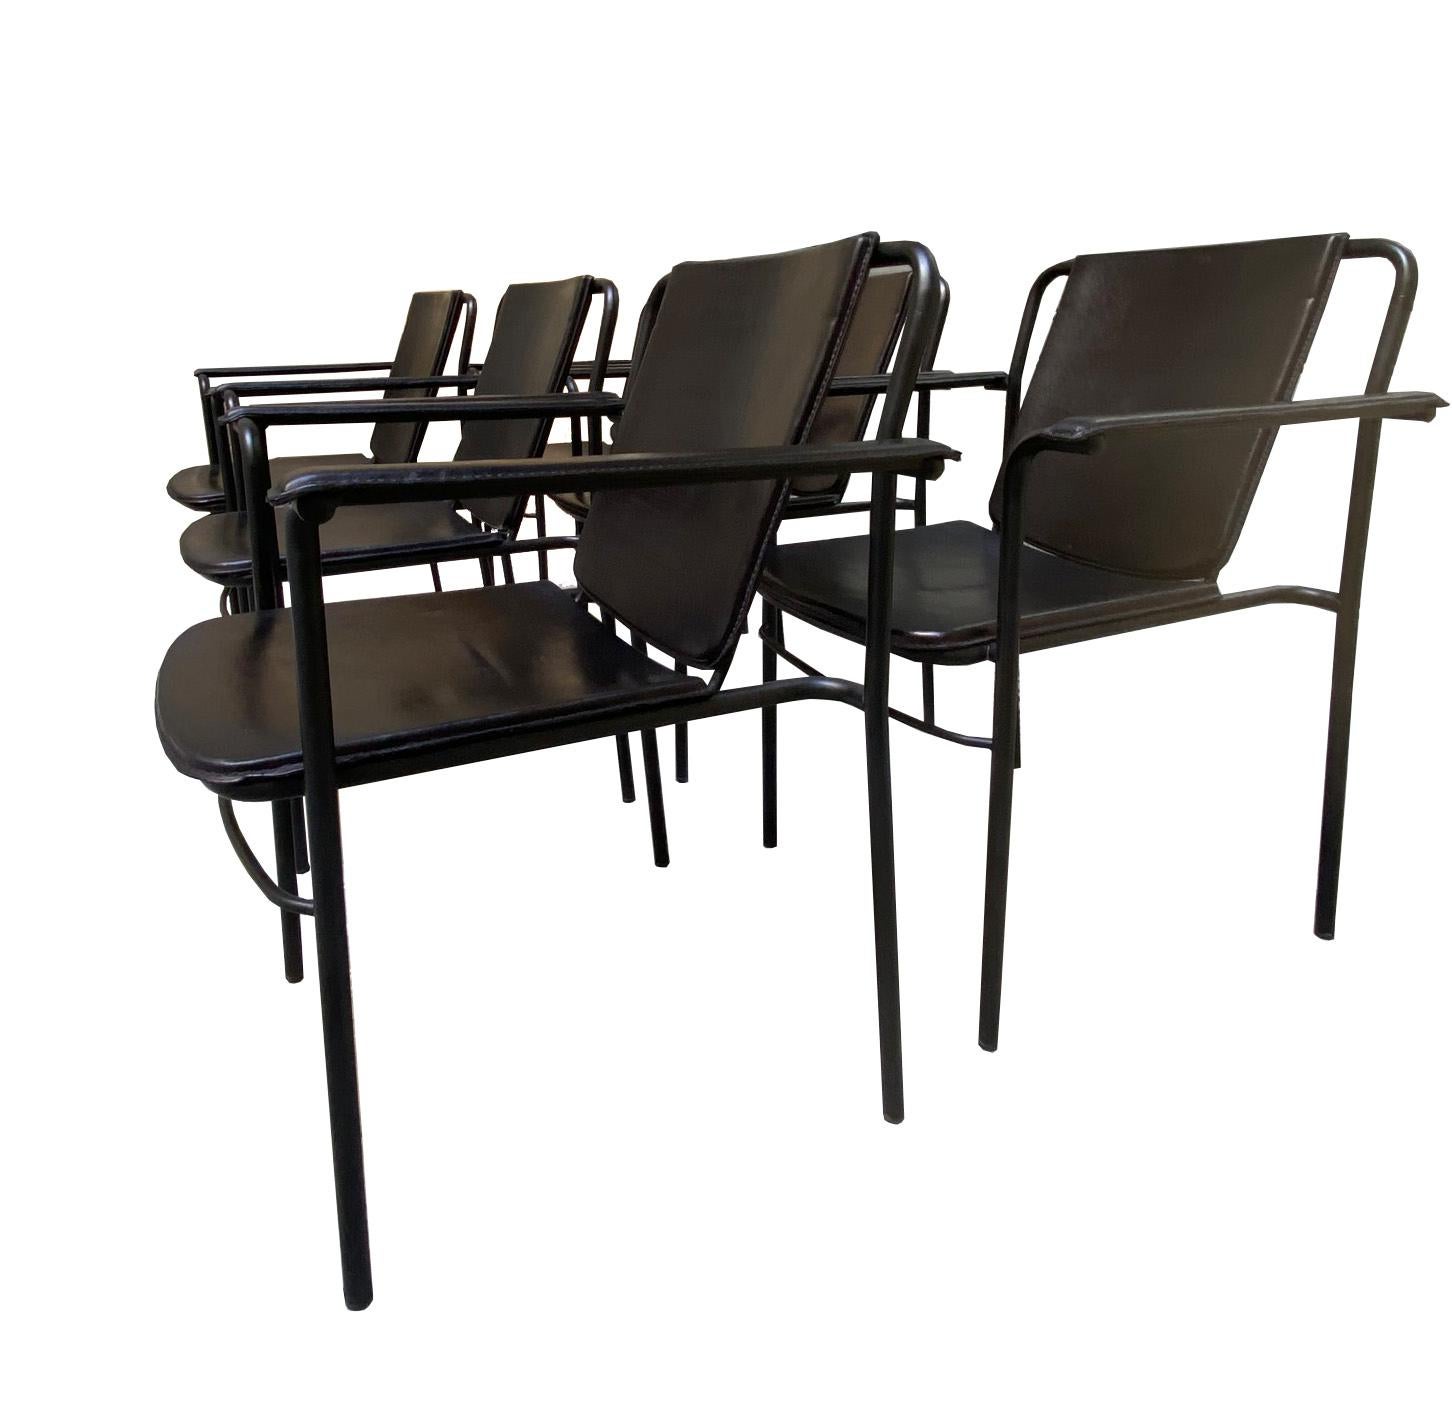 Mid-Century Modern Set of Six 'Movie' Chairs by Mario Marenco for Poltrona Frau